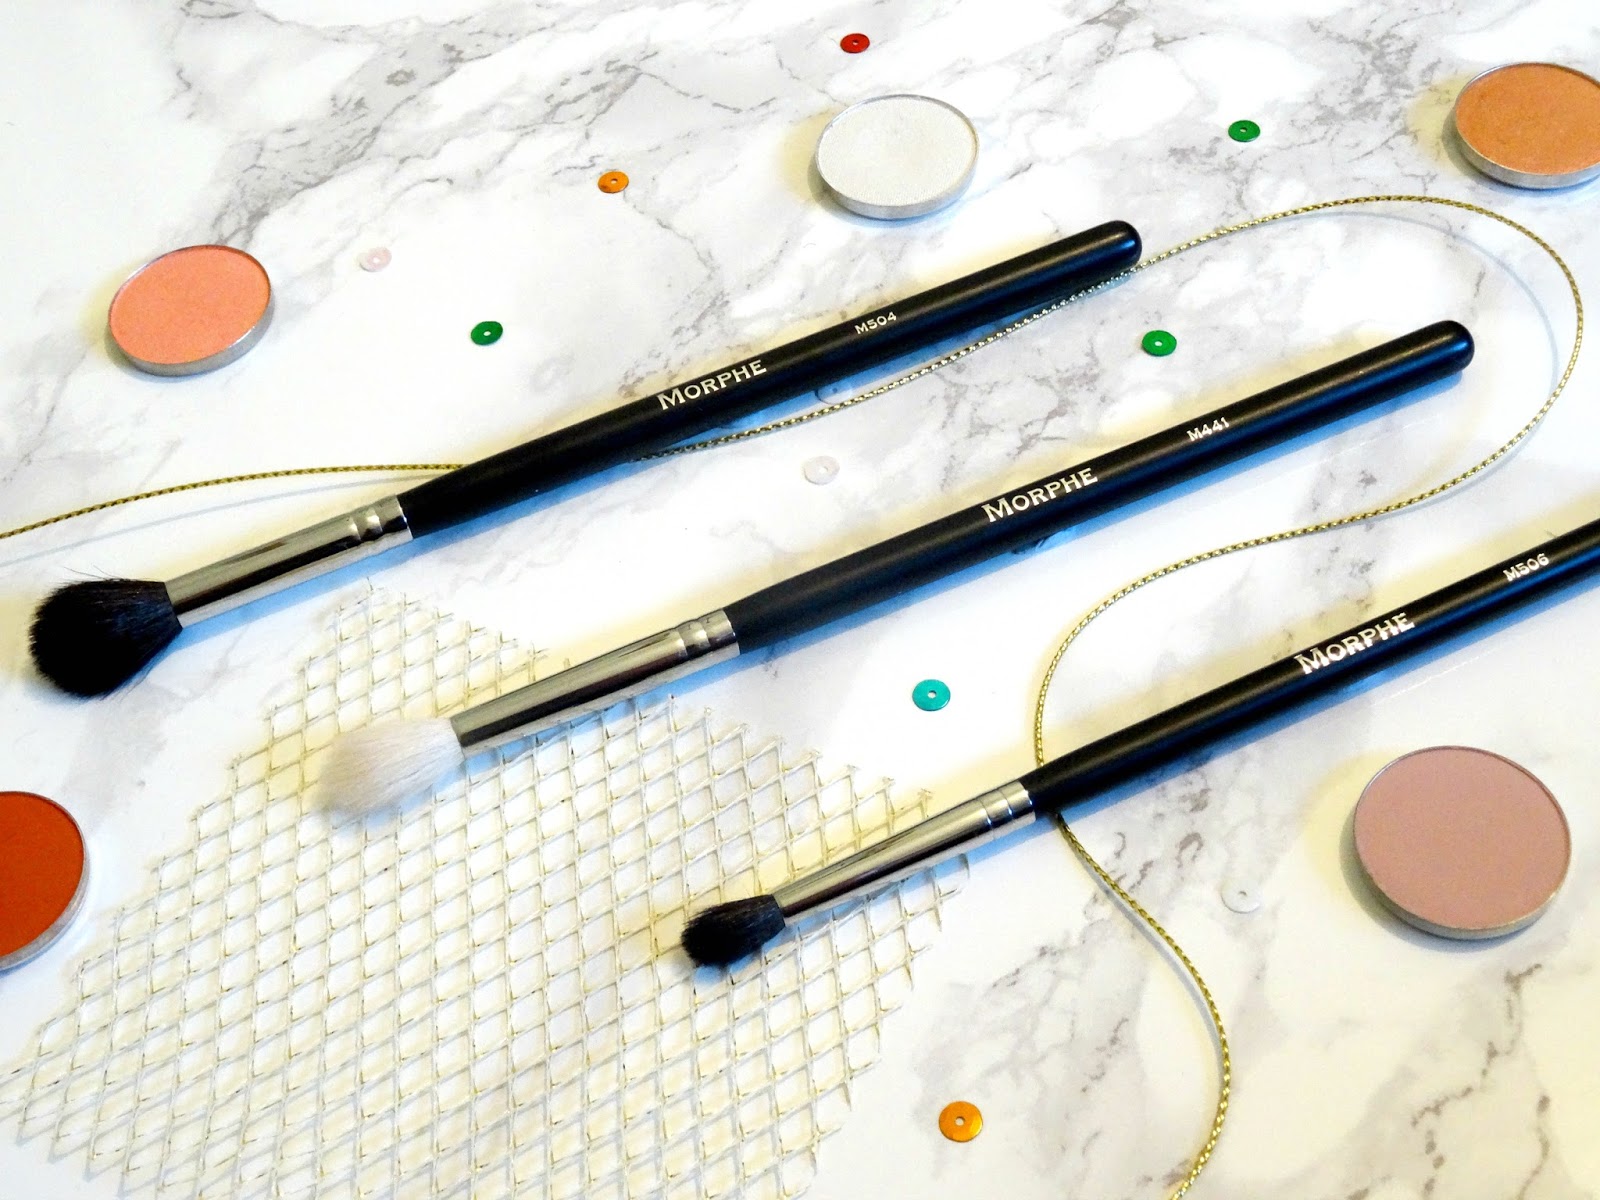 3 Brushes To Try From Morphe: M441, M506 and M504